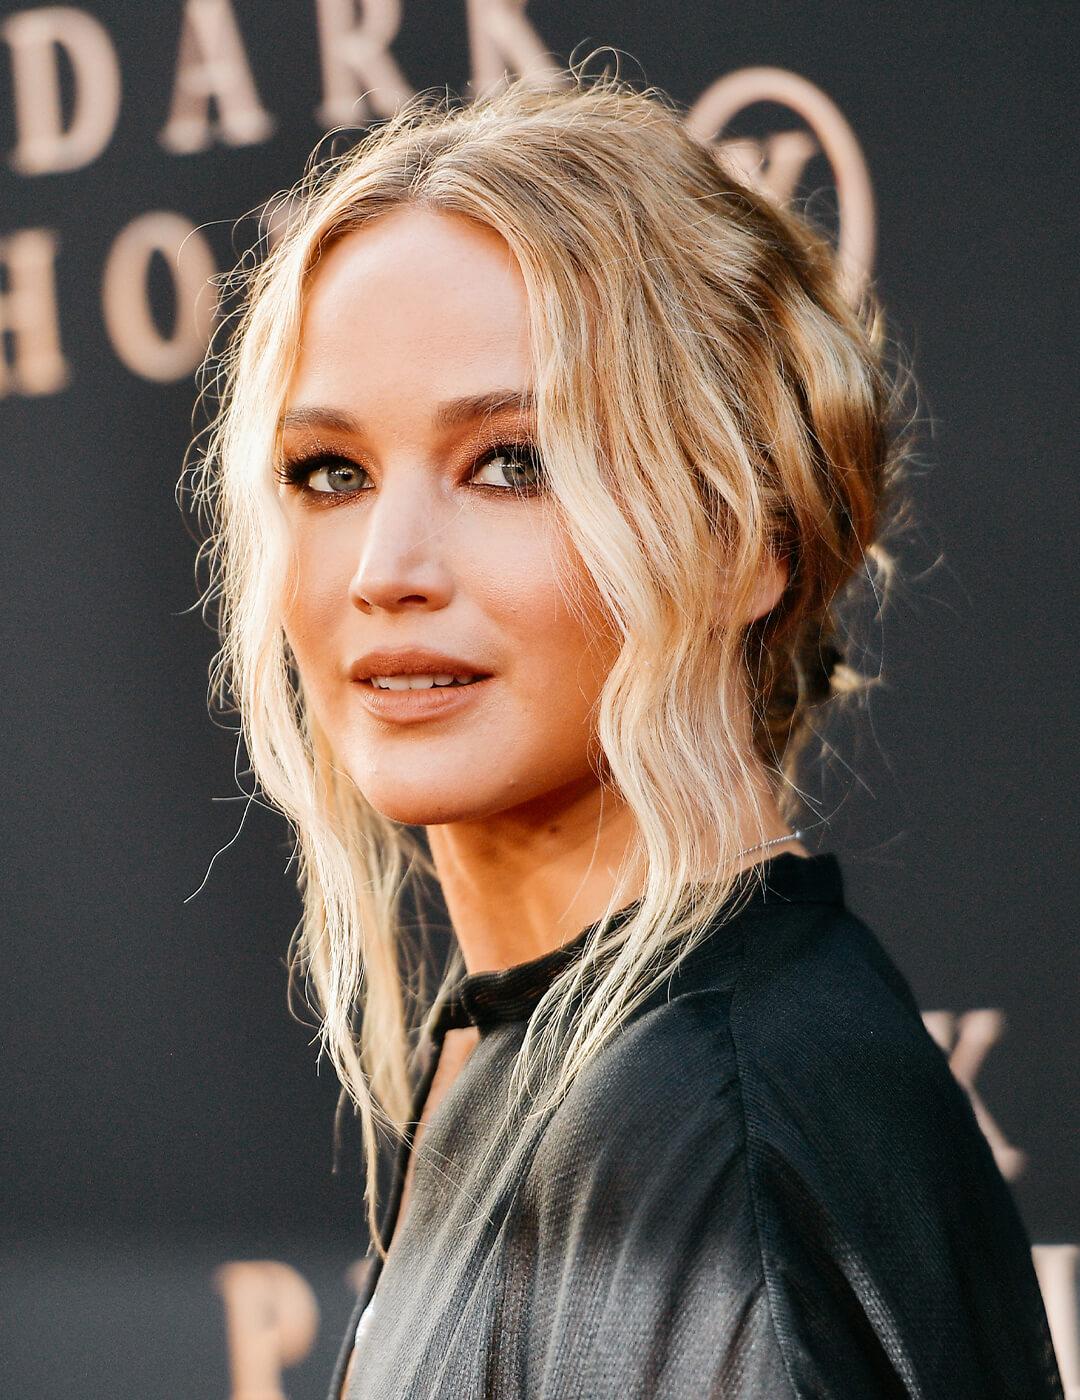 Jennifer Lawrence looking chic in a messy, low bun hairstyle and black outfit